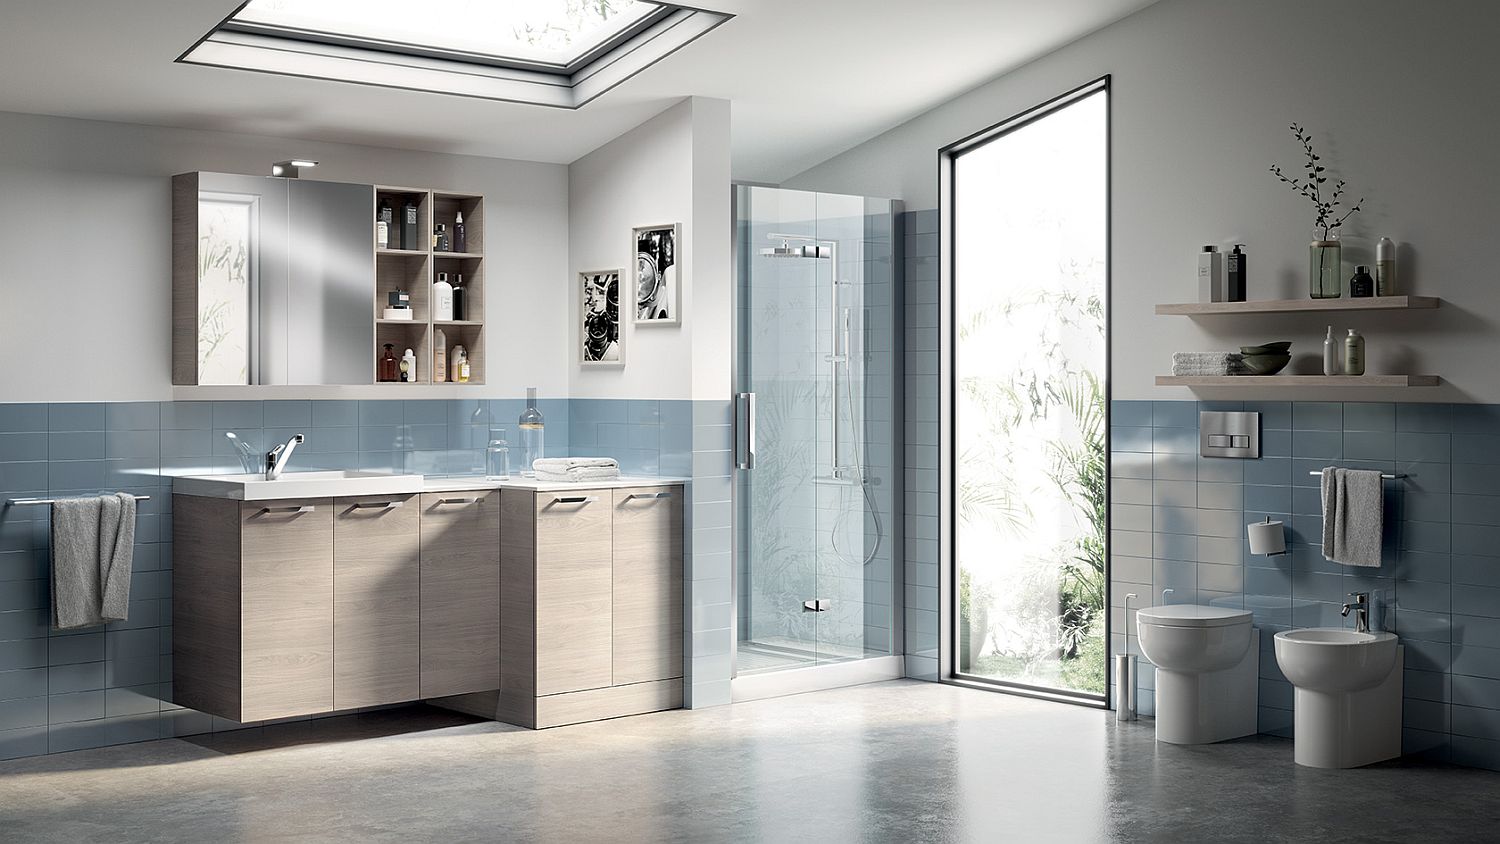 Laundry Space combines the bathroom with a contemporary laundry room